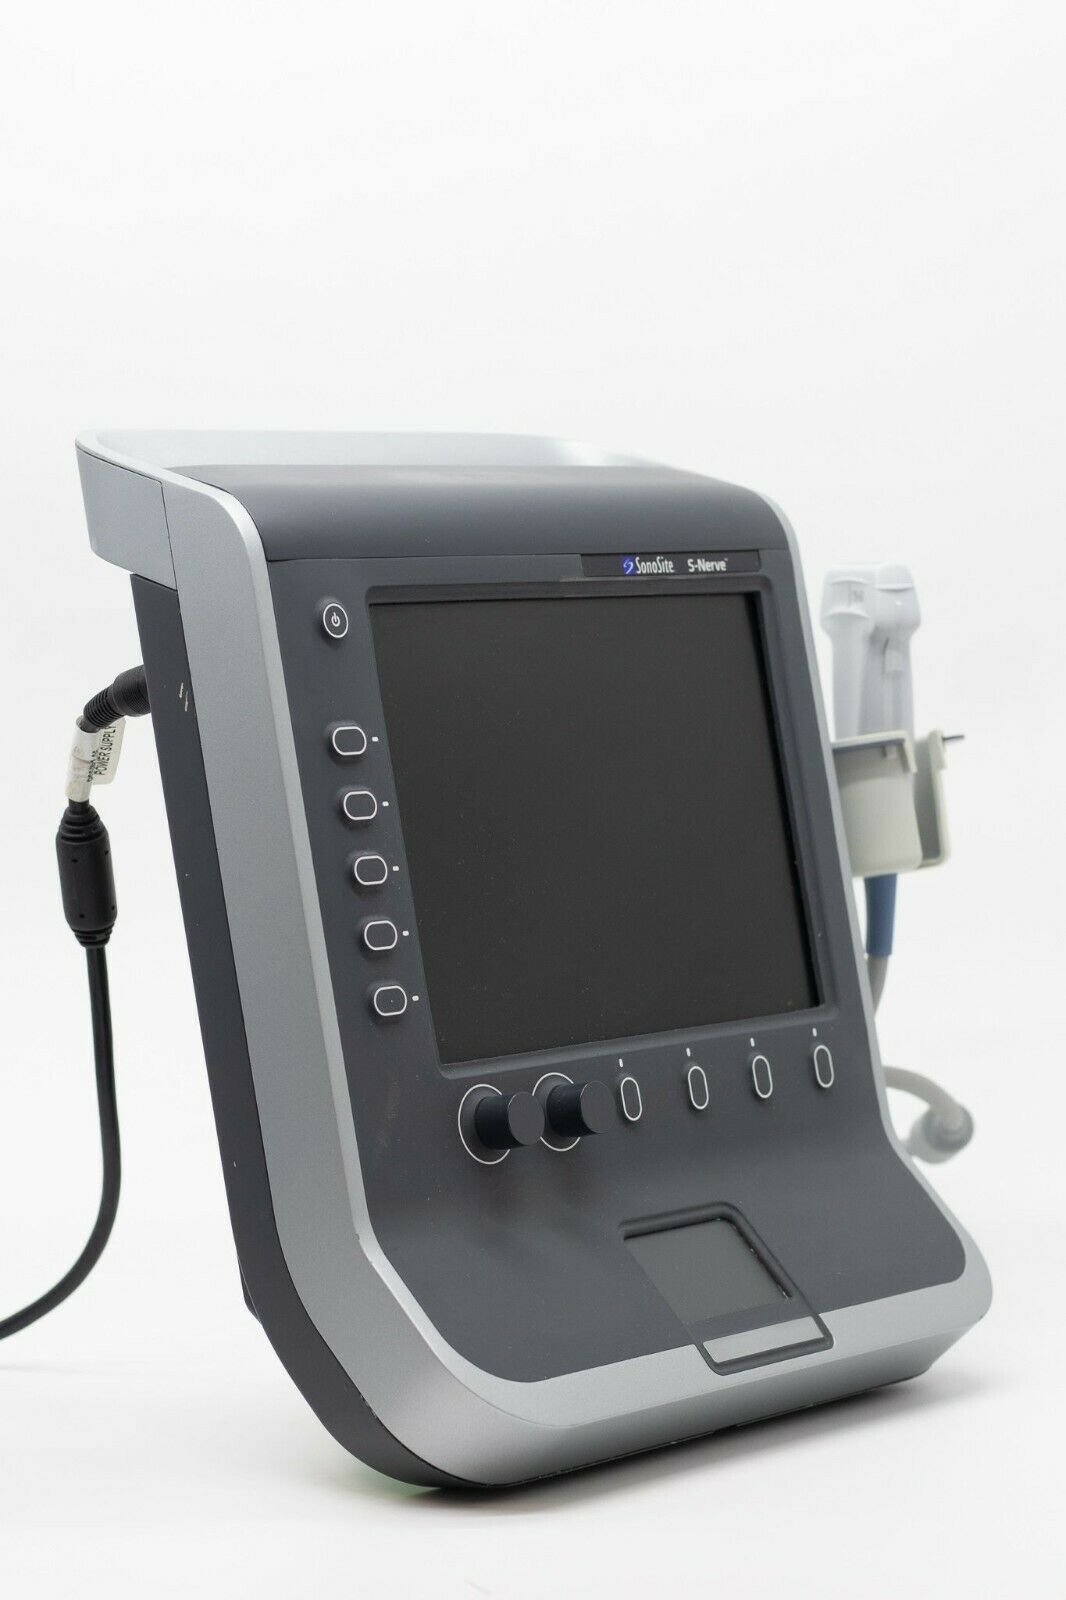 SONOSITE FUJIFILM S-NERVE ULTRASOUND PORTABLE SYSTEM - NEEDLE GUIDED INJECTIONS